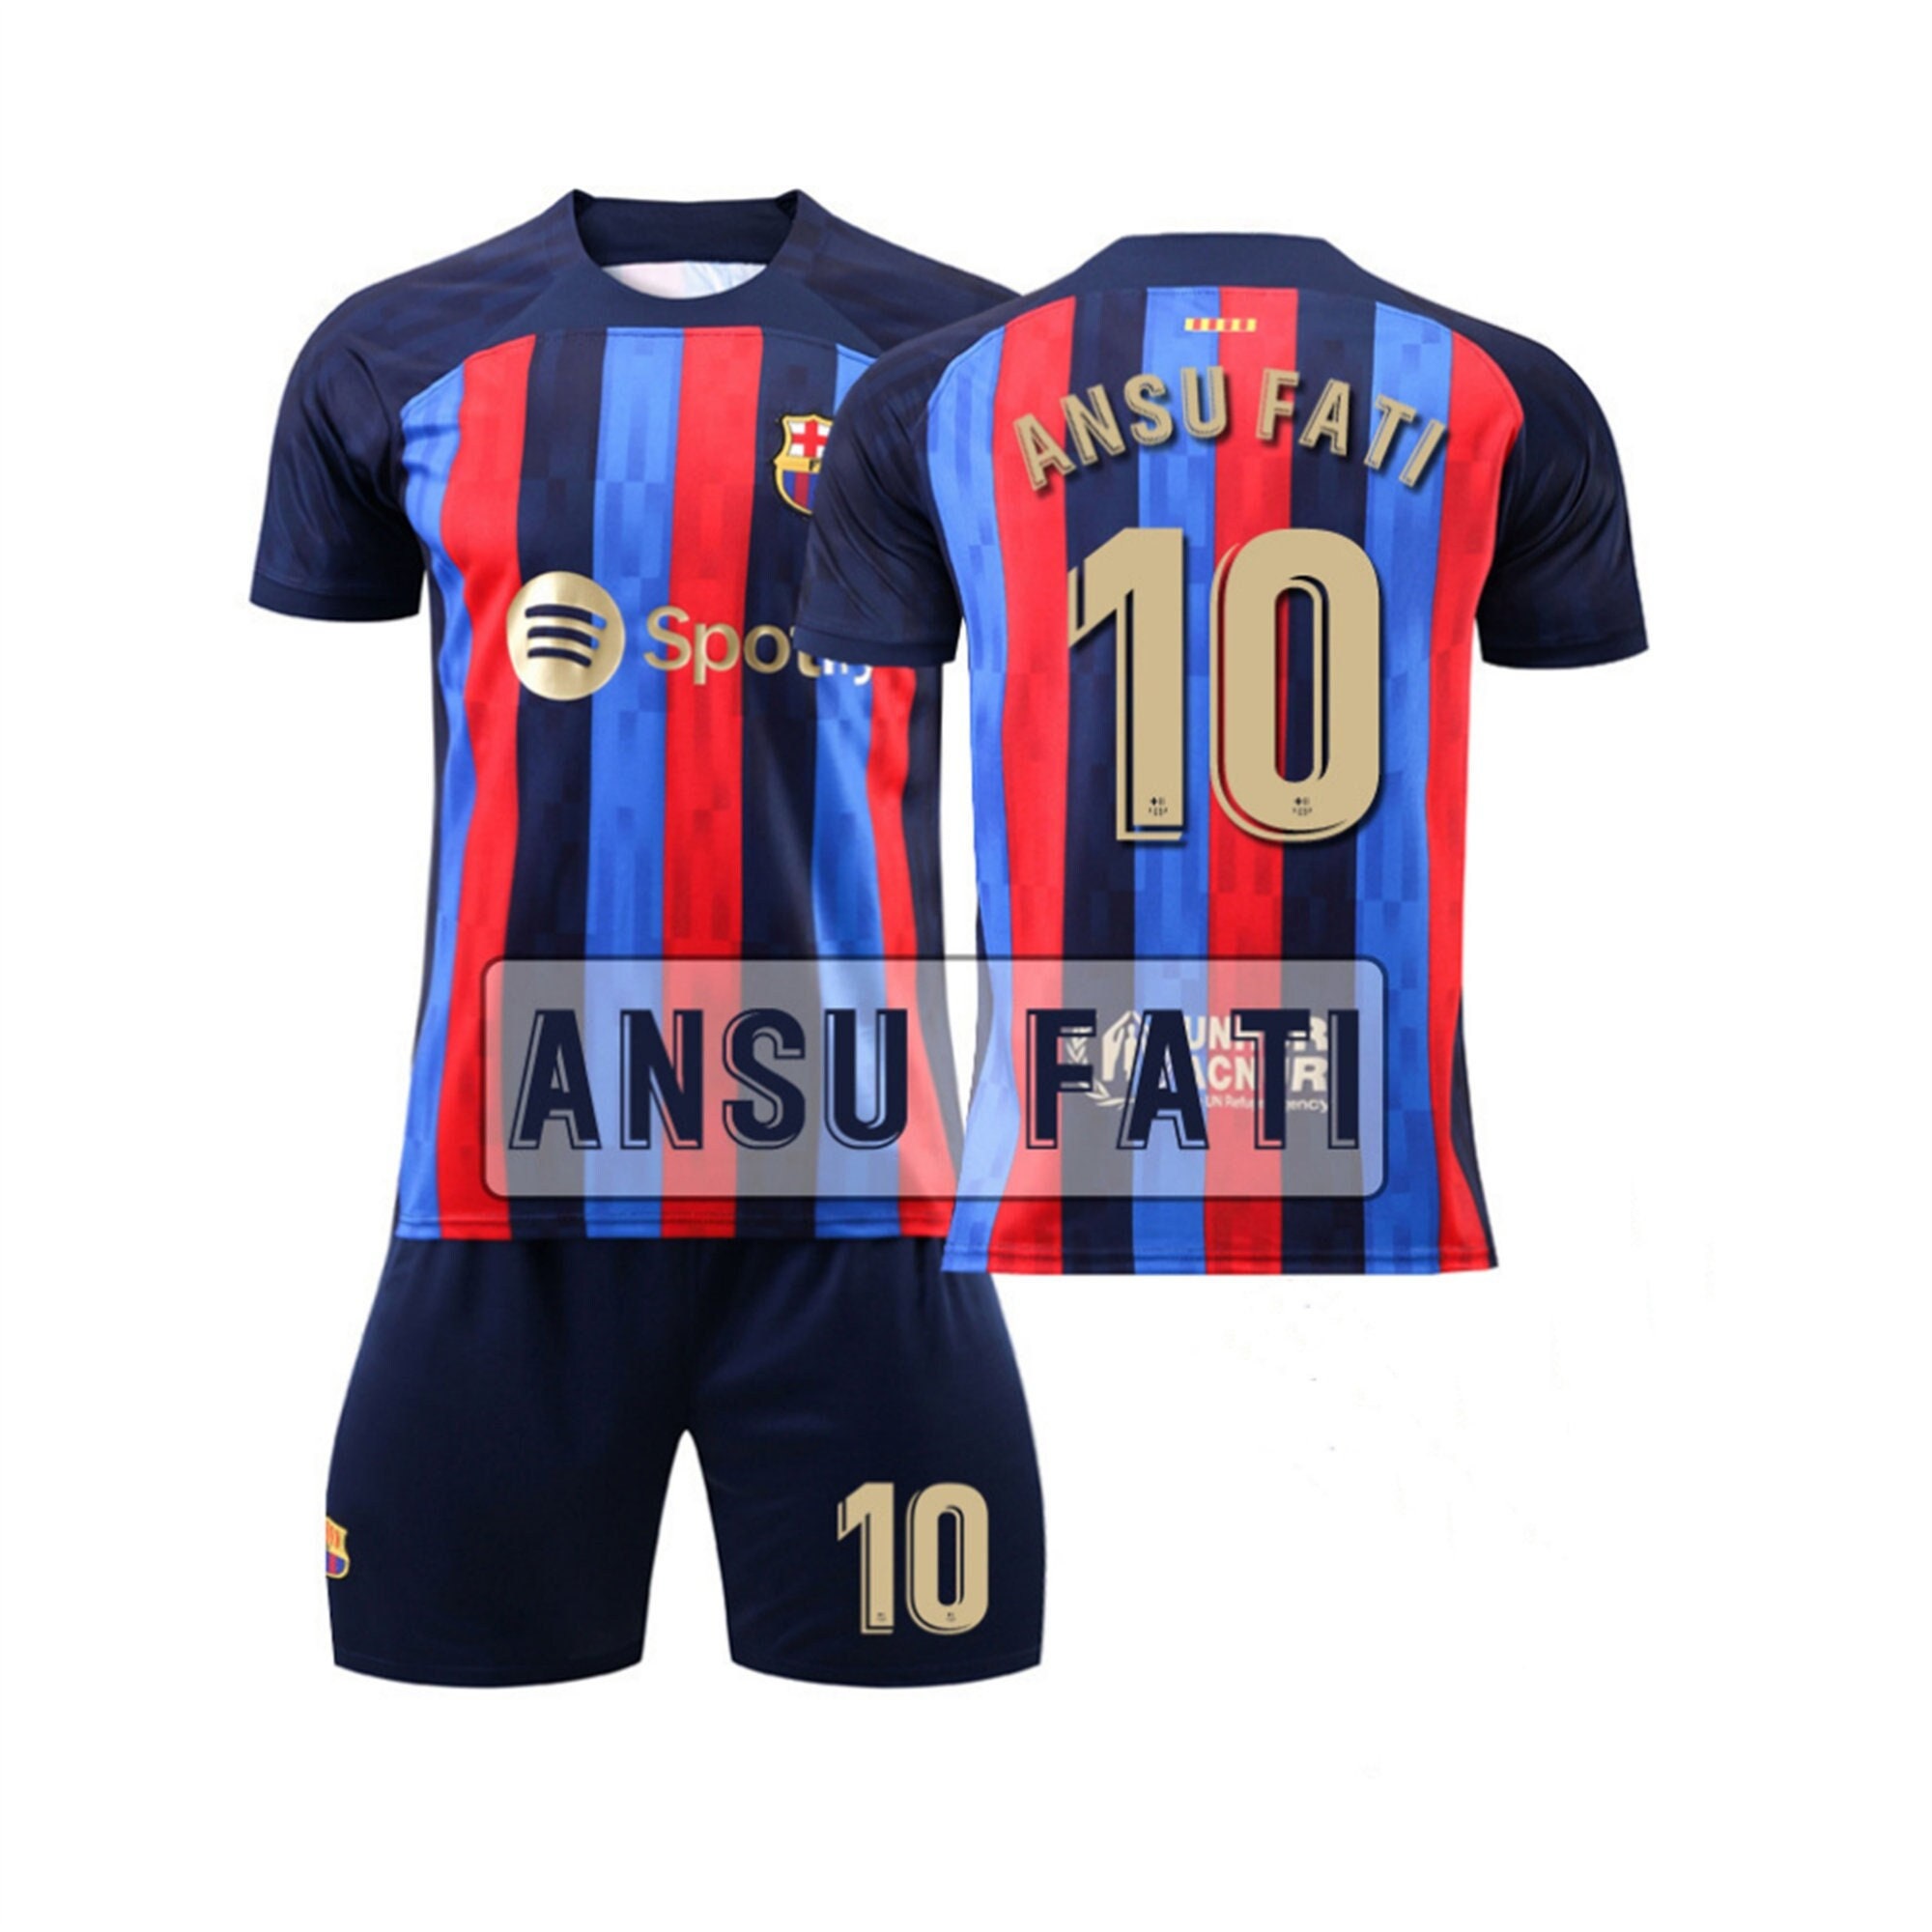 Buy Jersey Barcelona Online In India - Etsy India